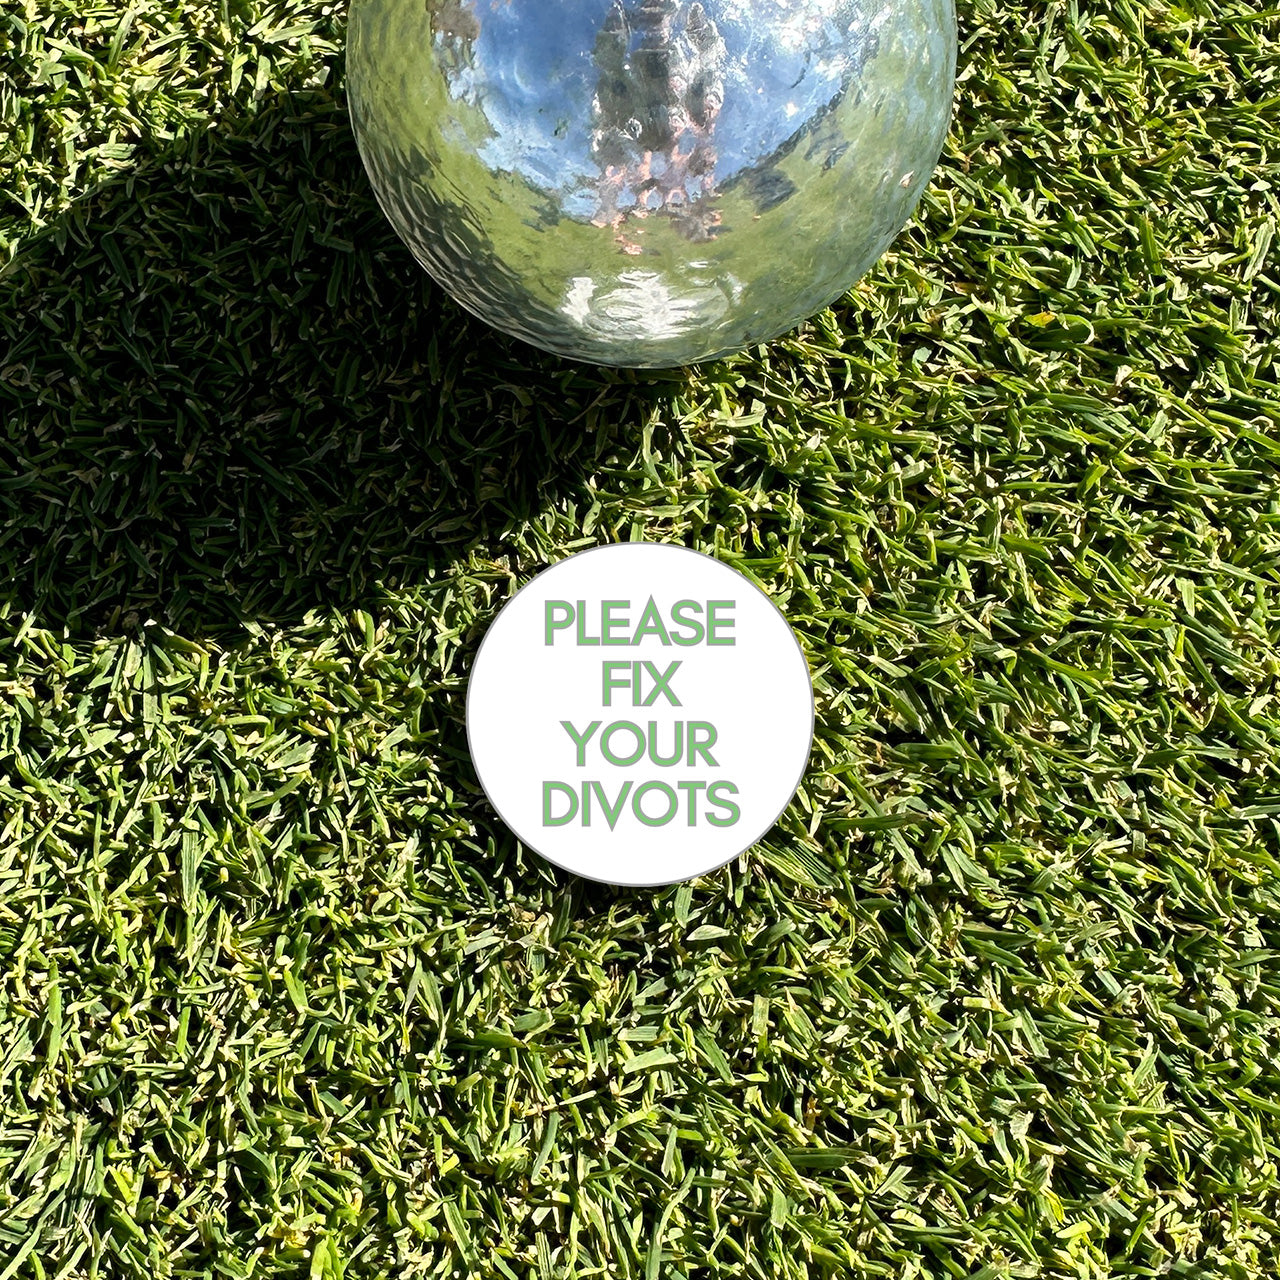 Don't Be D Golf Ball Marker with Hat Clip